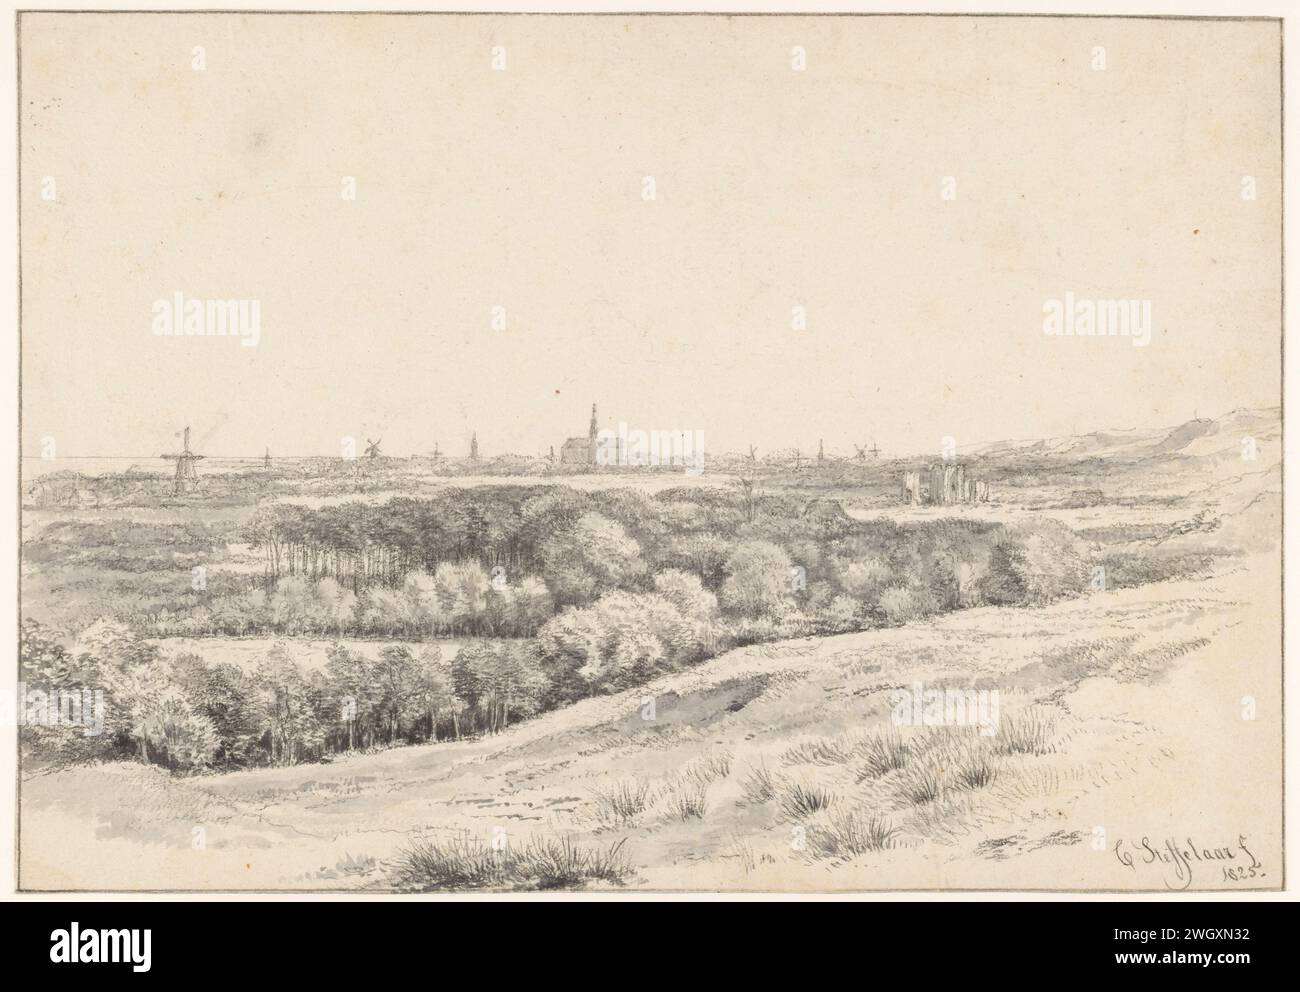 Landscape with a few mills and a church in the offing, Cornelis Steffelaar, 1825 drawing   paper. chalk brush factories and mills in landscape. landscape with tower or castle Stock Photo